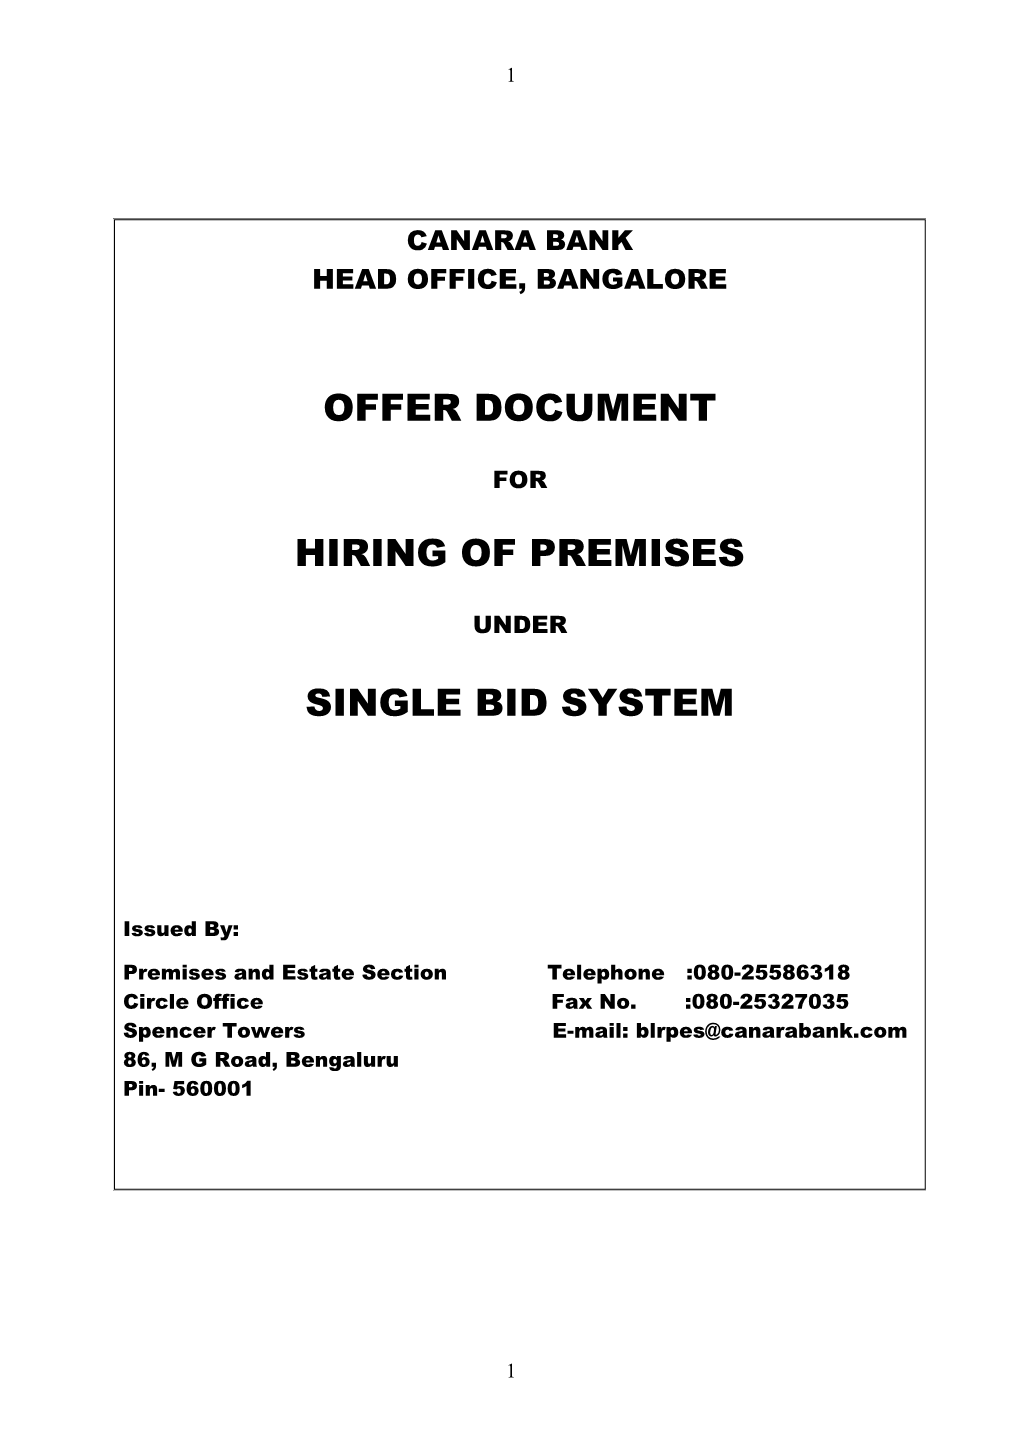 The Offer Document Consists of the Following